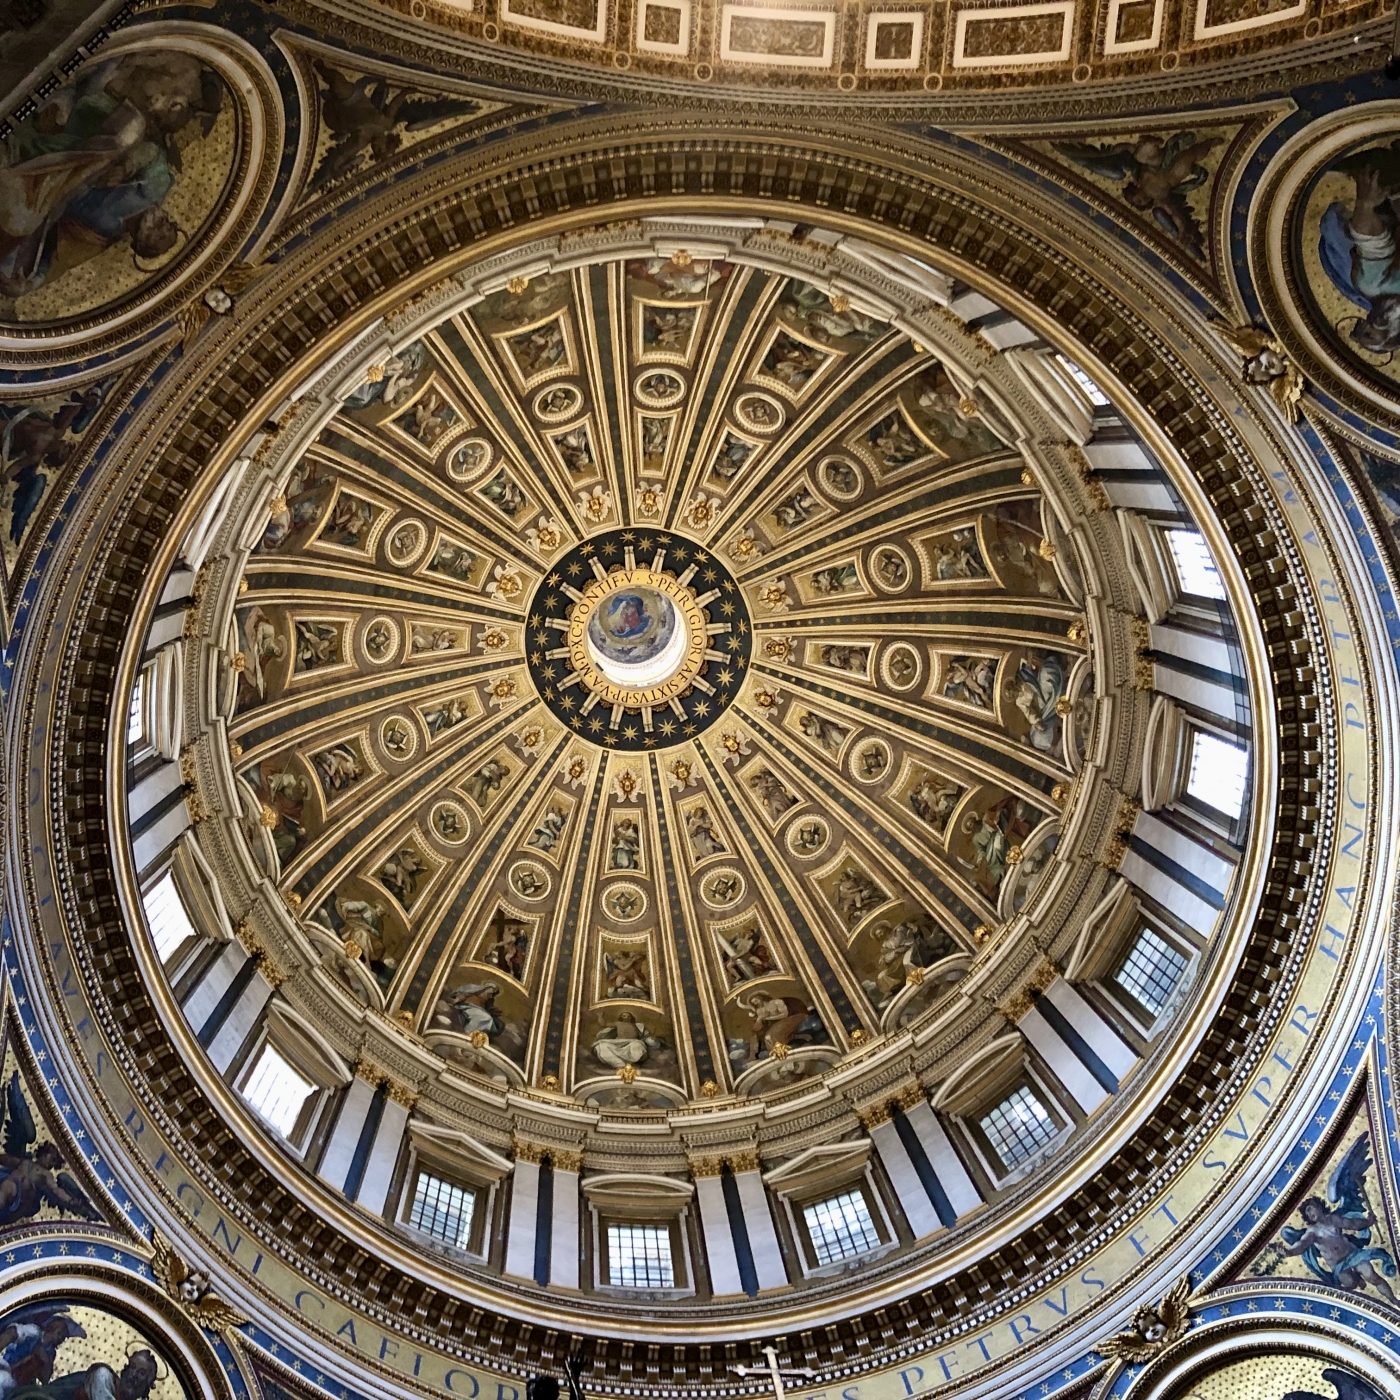 Inside of Dome in St. Peter's